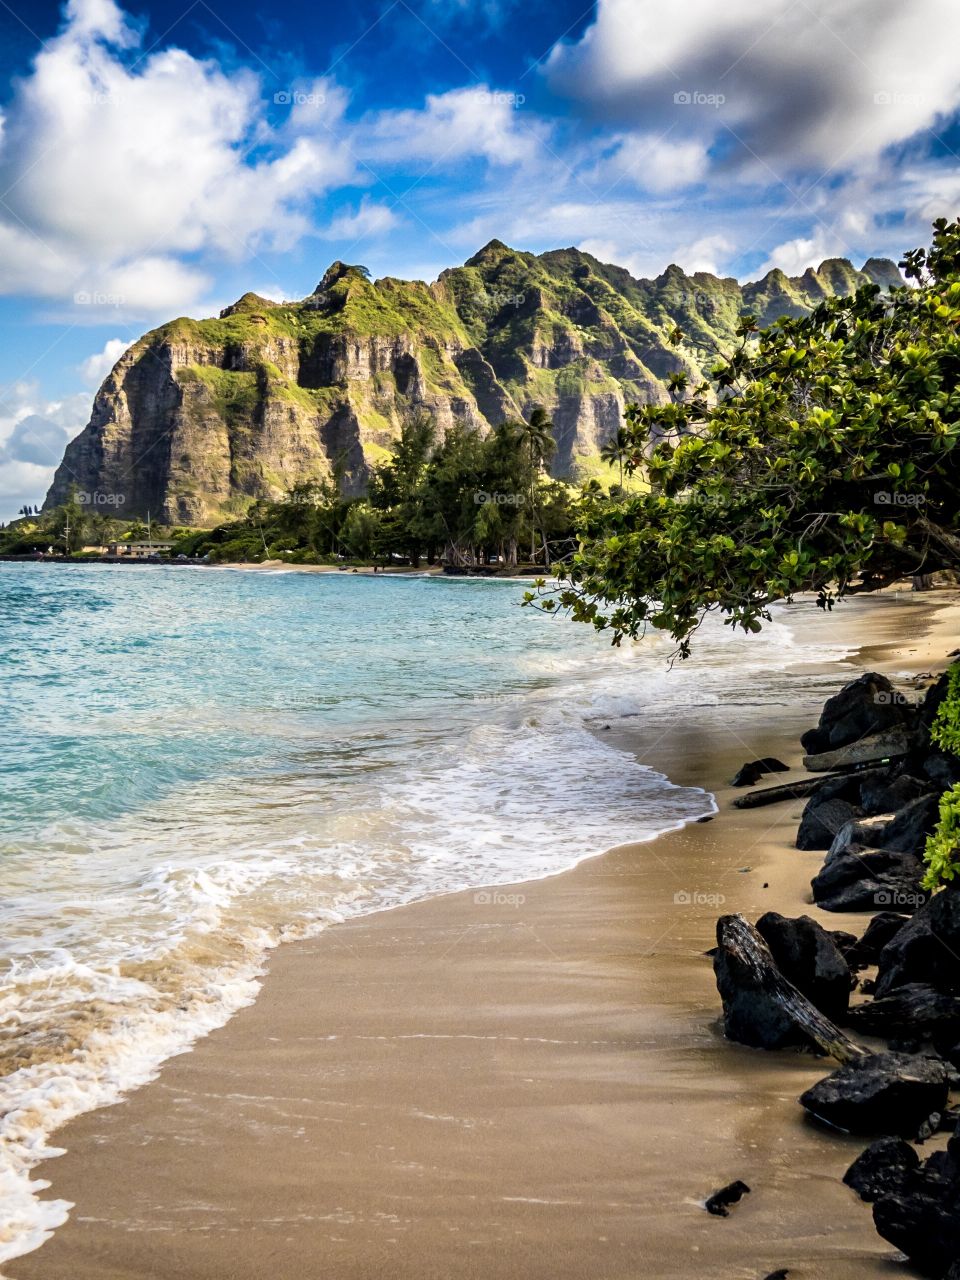 A beach on the windward side of Oahu, Hawaii where the Pacific Ocean meets the Jurassic looking mountains of the island. 